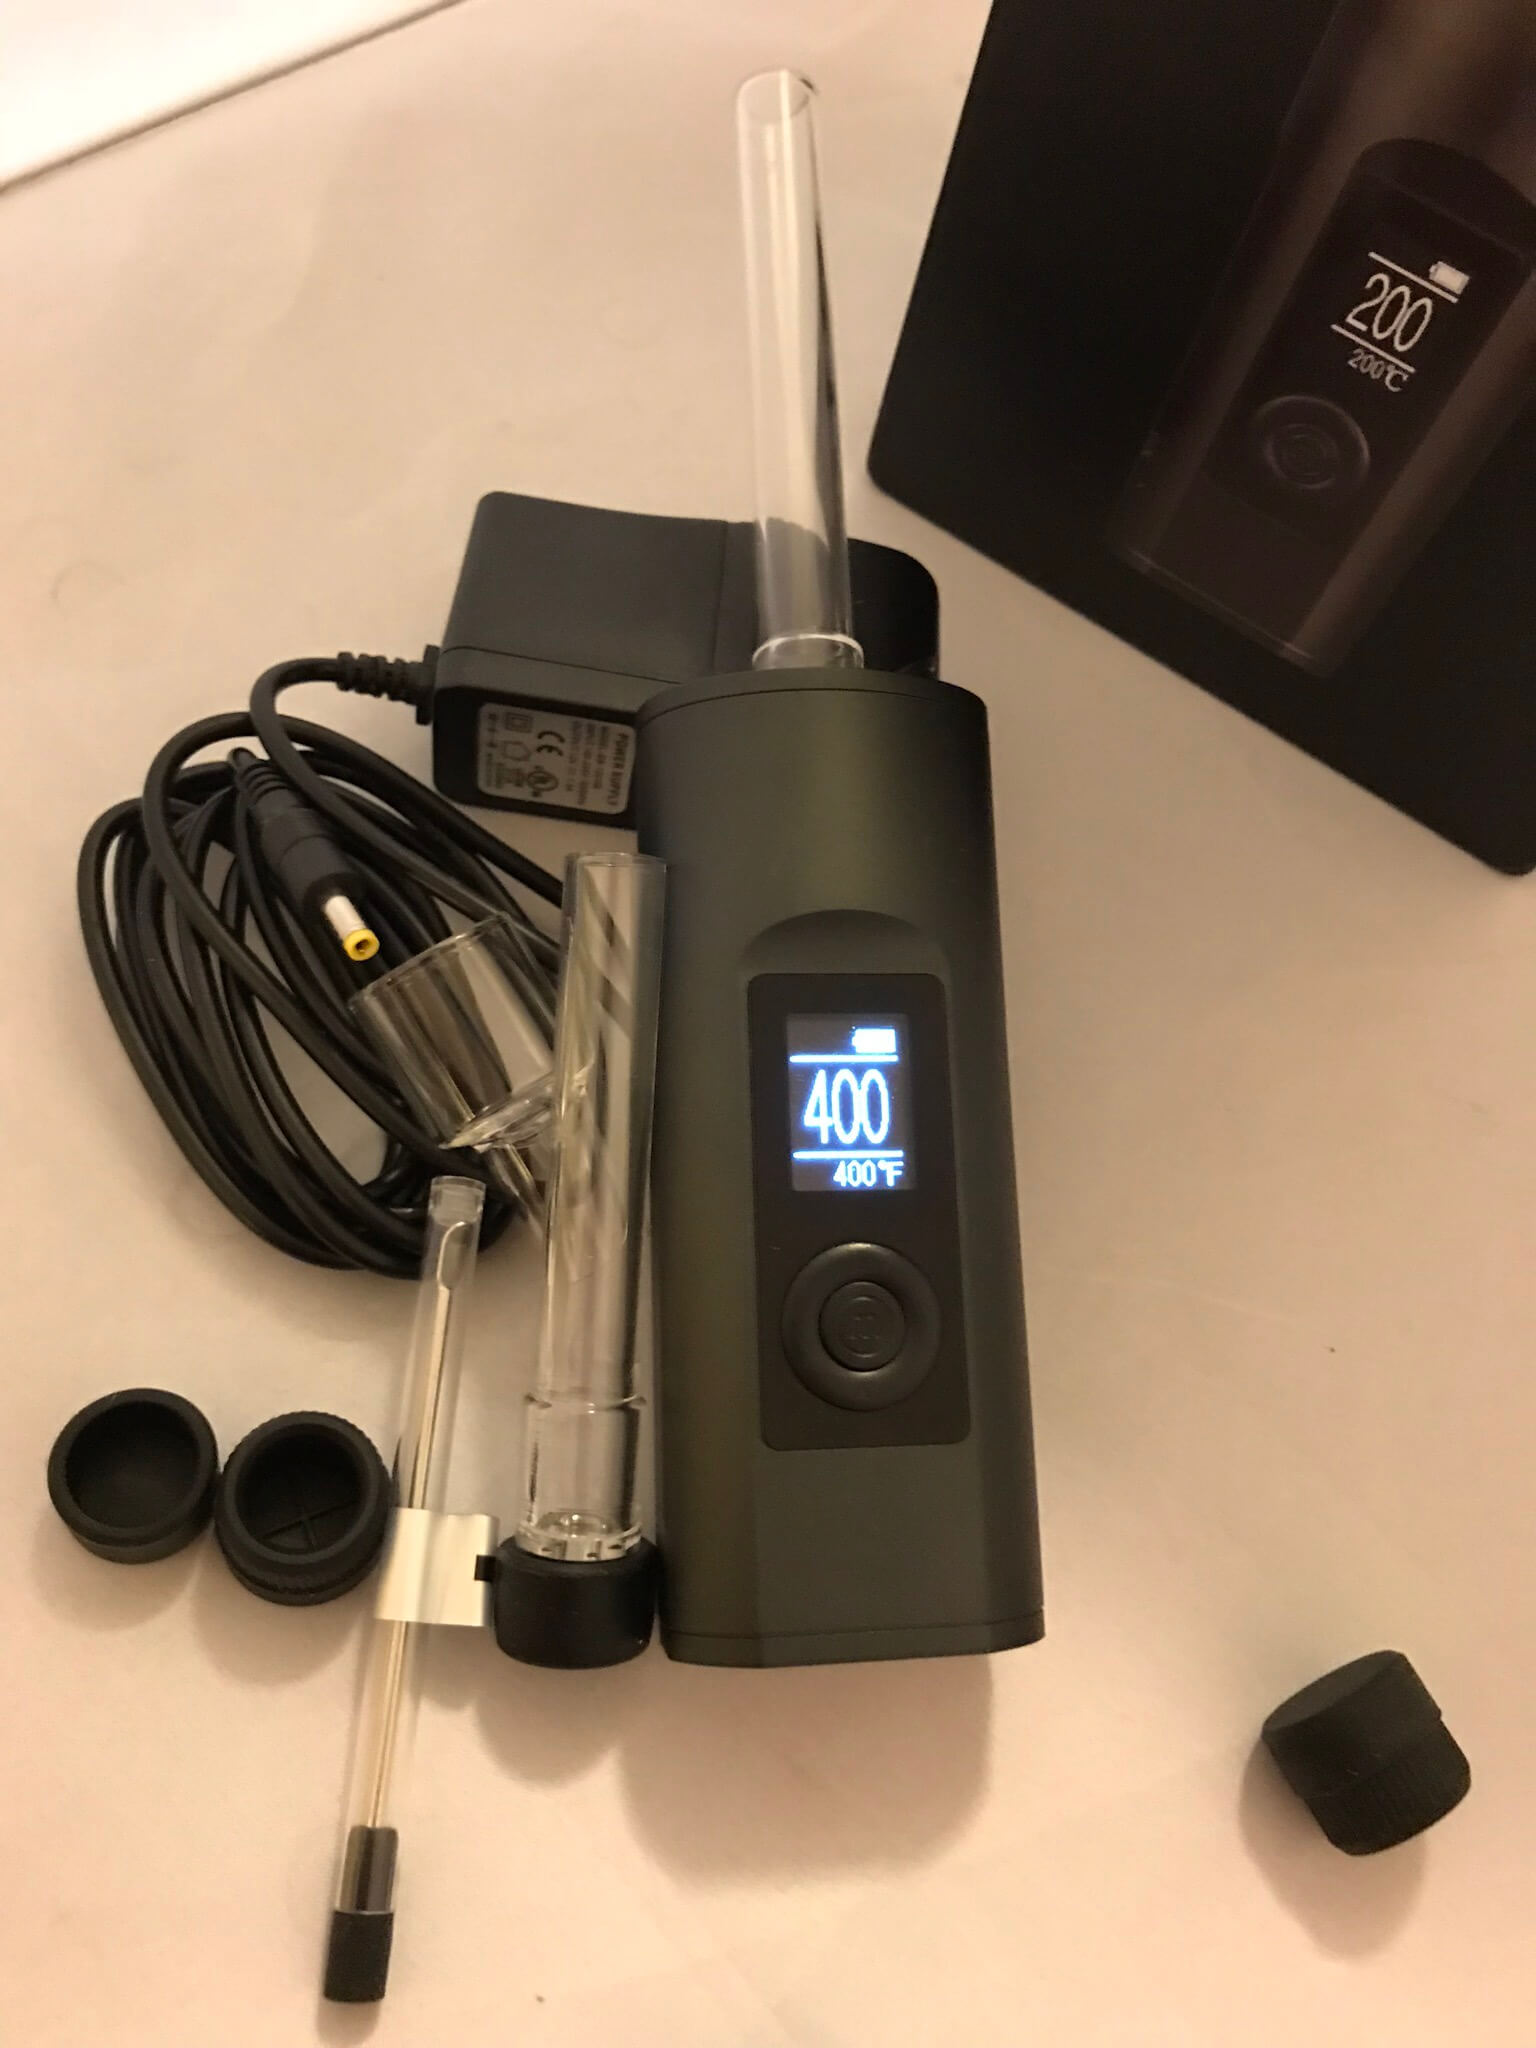 https://www.tothecloudvaporstore.com/wp-content/uploads/2018/03/used-SOLO-2-vaporizer-for-sale-at-to-the-Cloud-Vapor-Store-.jpg